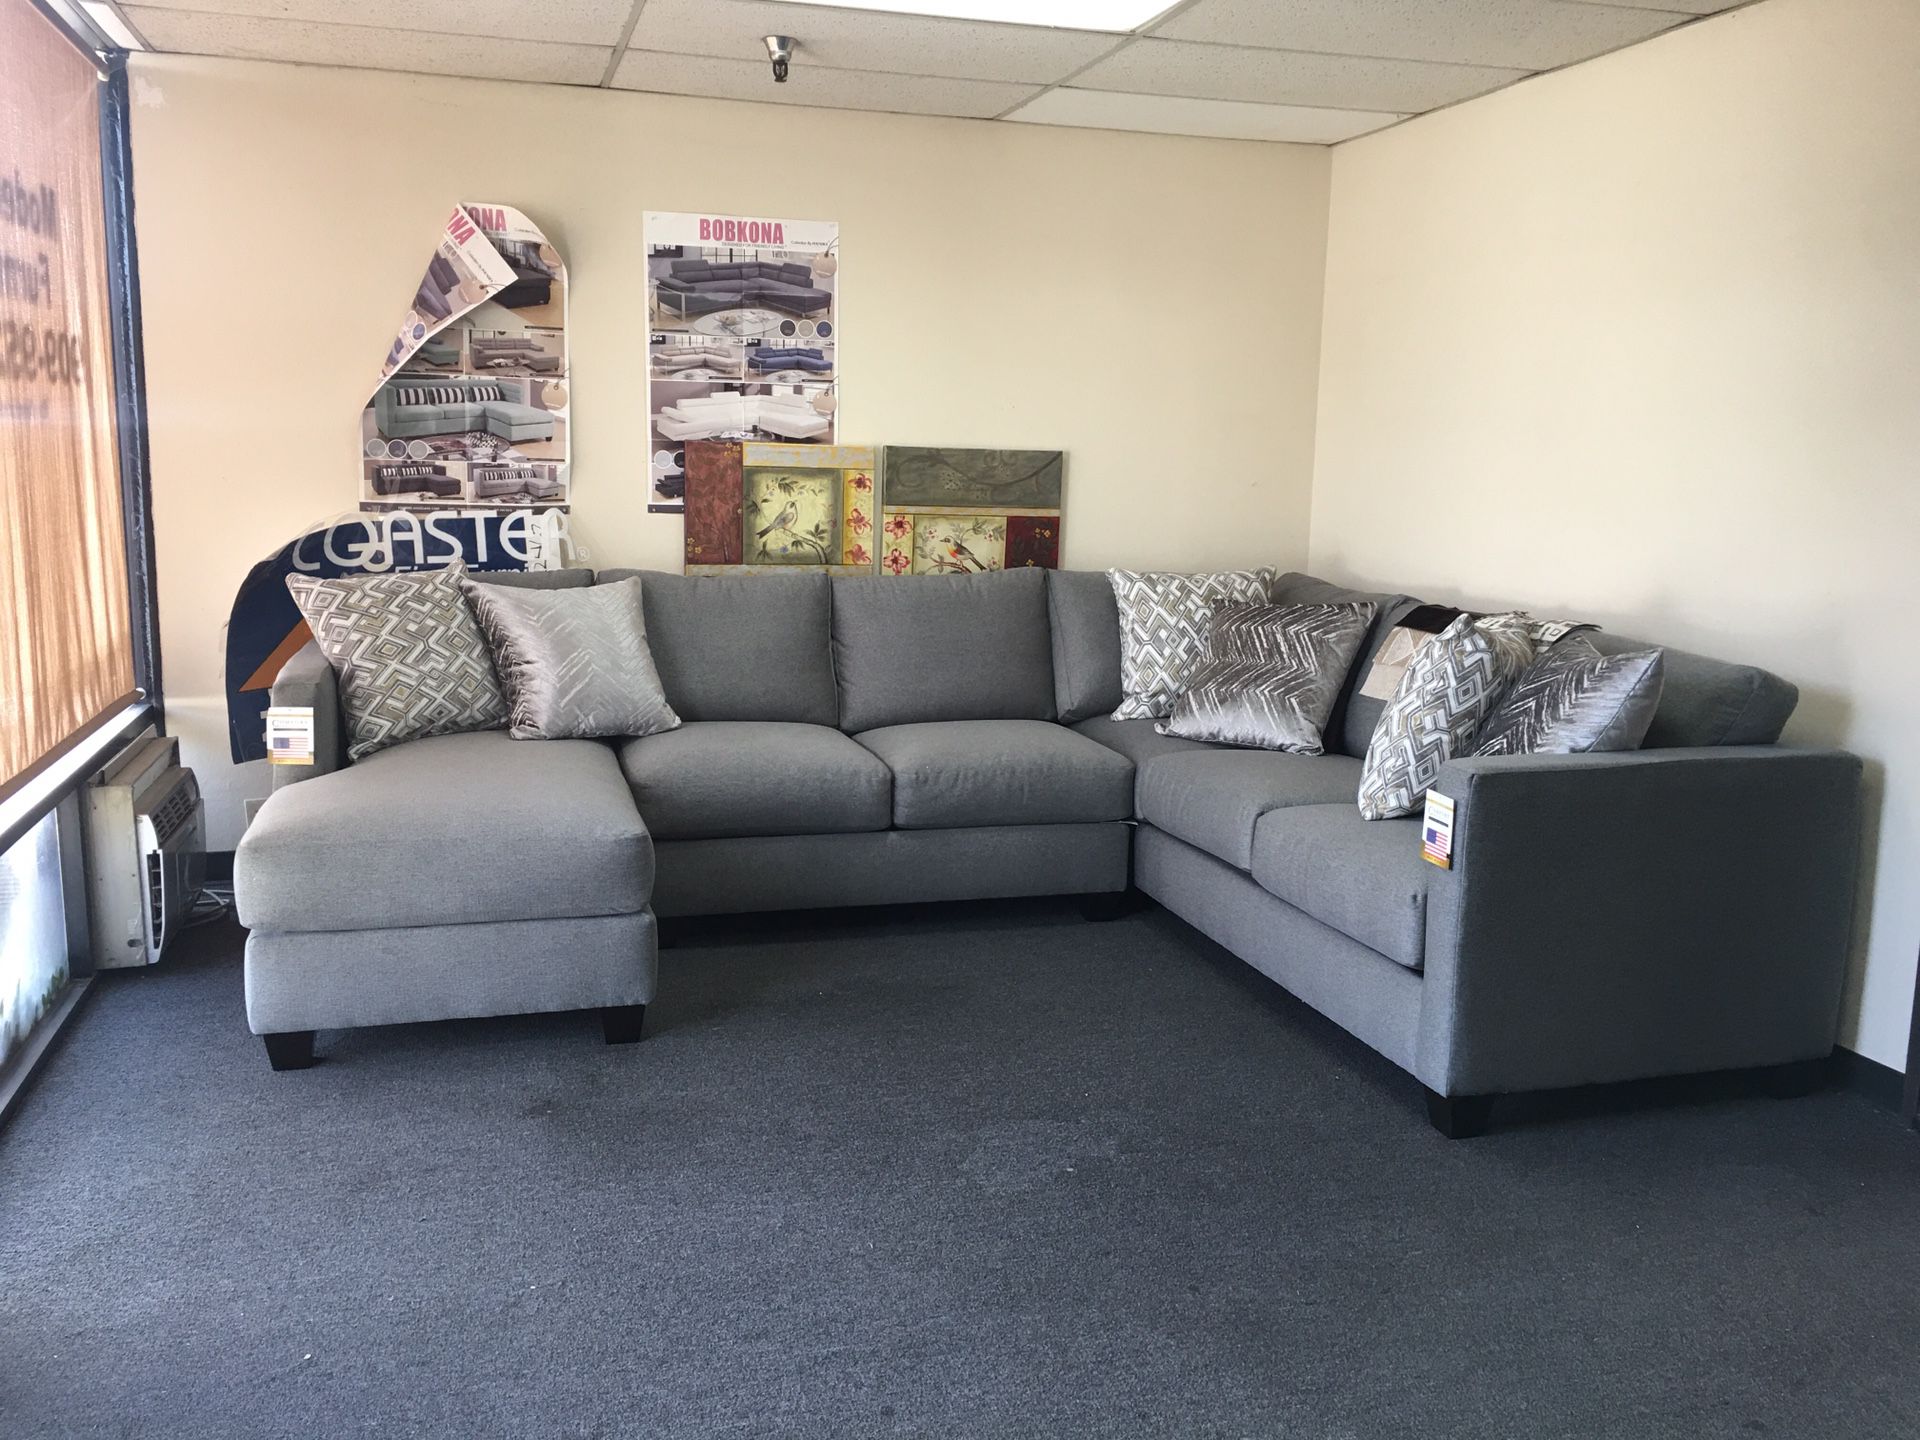 New custom made sectional sofa grey includes 6 accent pillows was $2,200 now $1,400